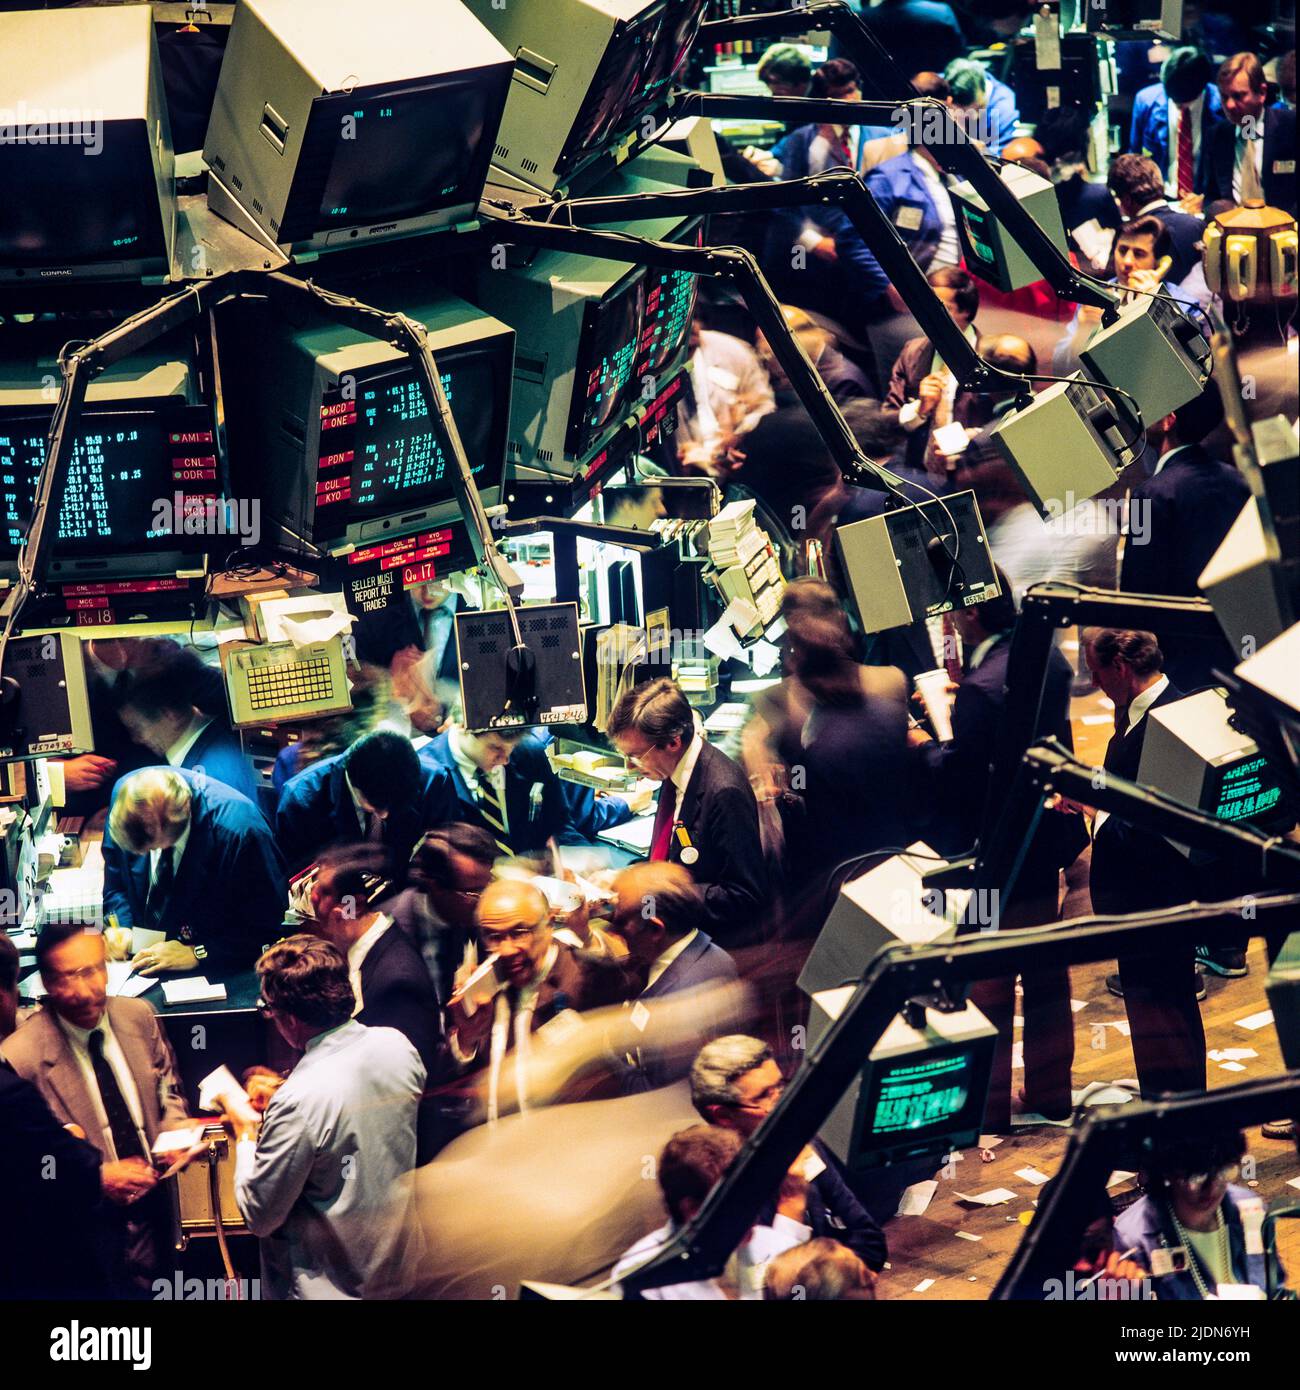 New York 1980s, NYSE, Stock Exchange interior, trading floor overview, financial district, Manhattan, New York City, NY, NYC, USA, Stock Photo